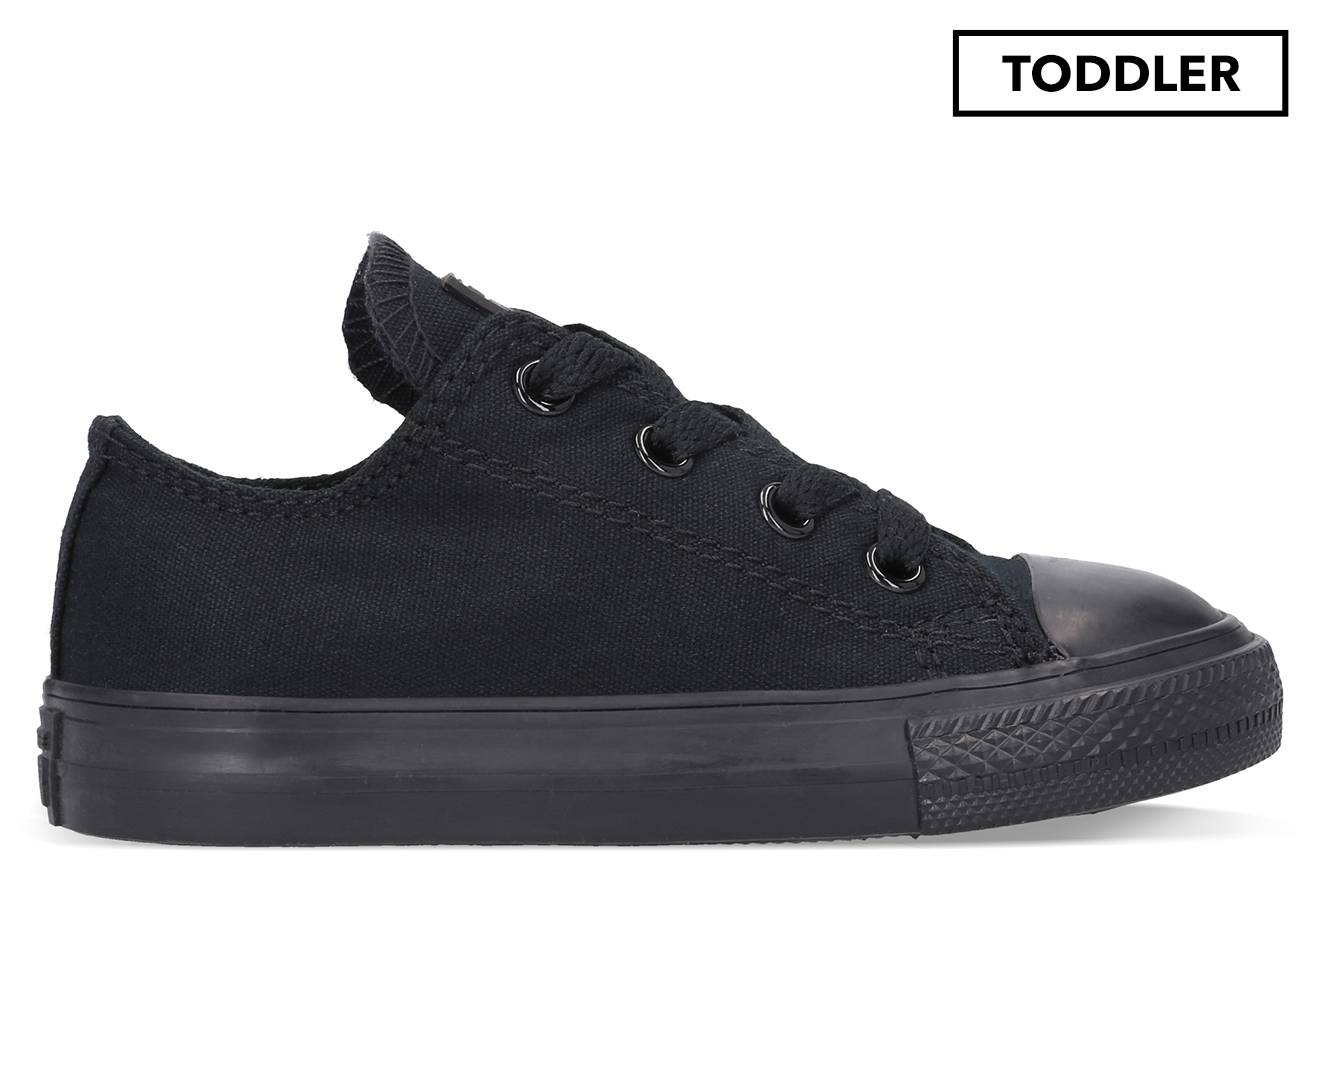 Converse Toddler Chuck Taylor All Star Low Top Sneakers - Black Monochrome  